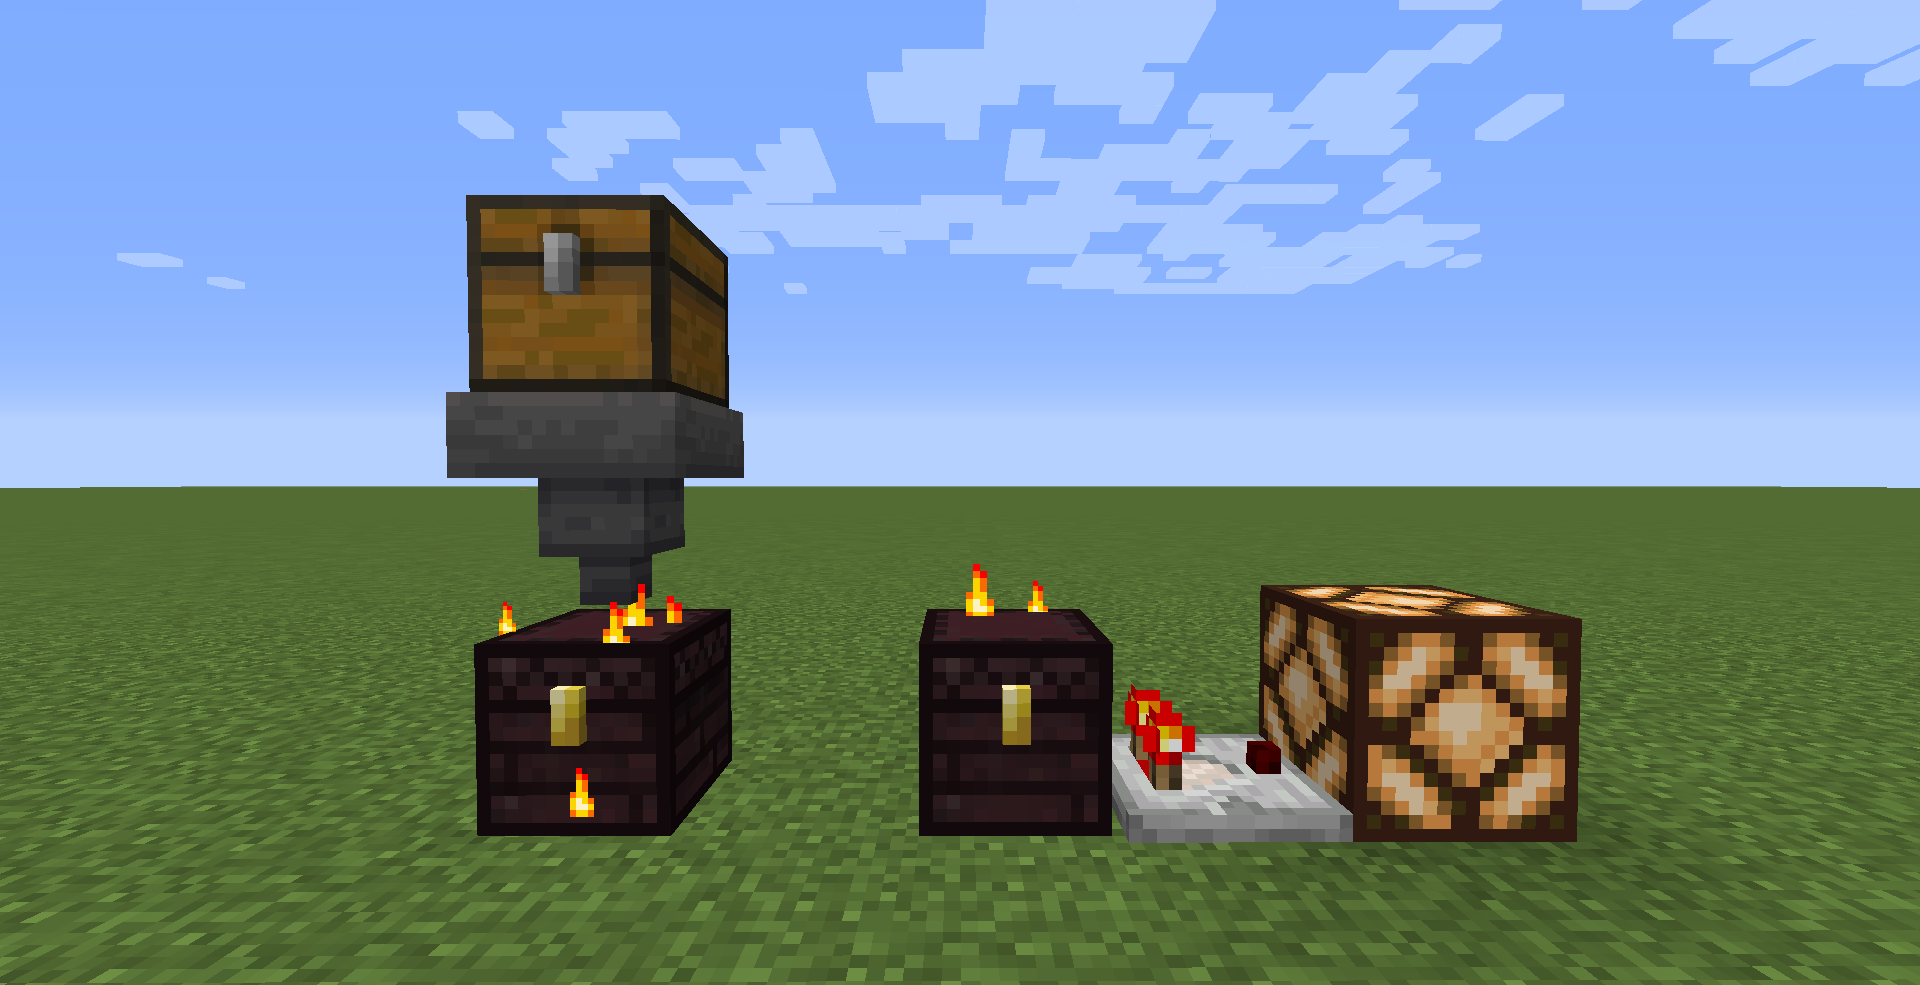 Hoppers/Comparators actually work